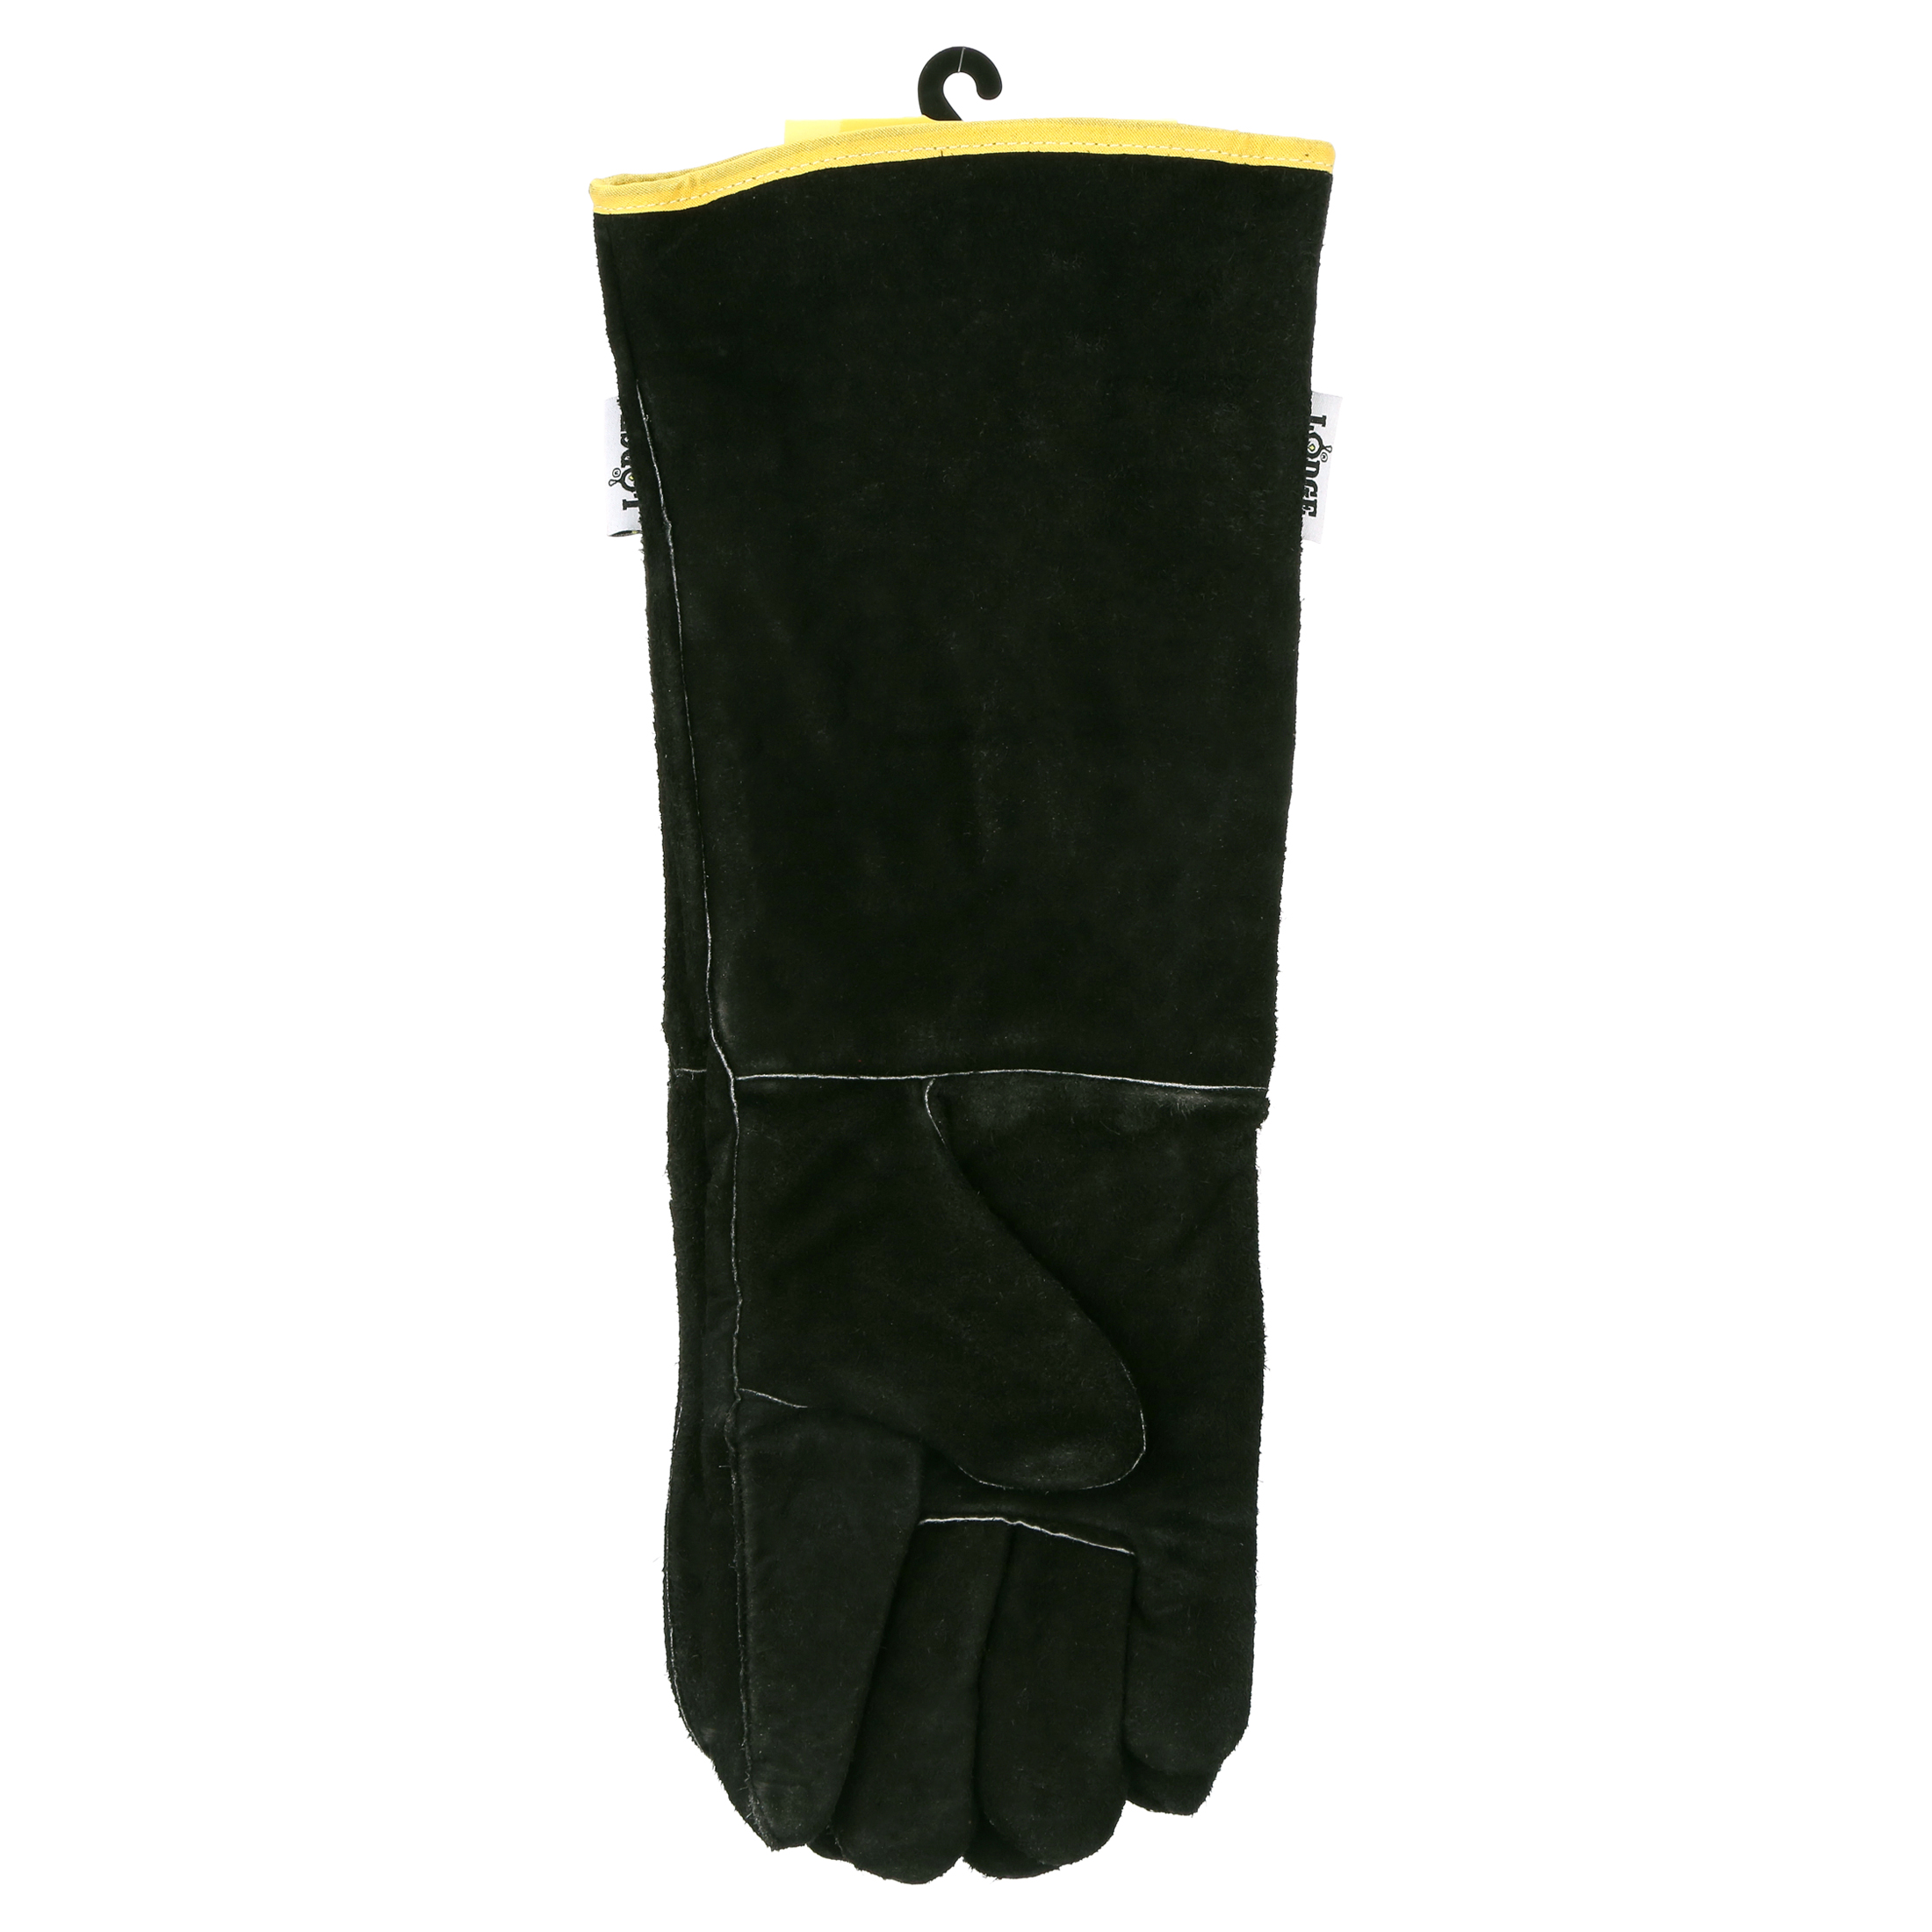 Lodge Cast Iron Logic Leather Gloves A5-2 - image 5 of 6